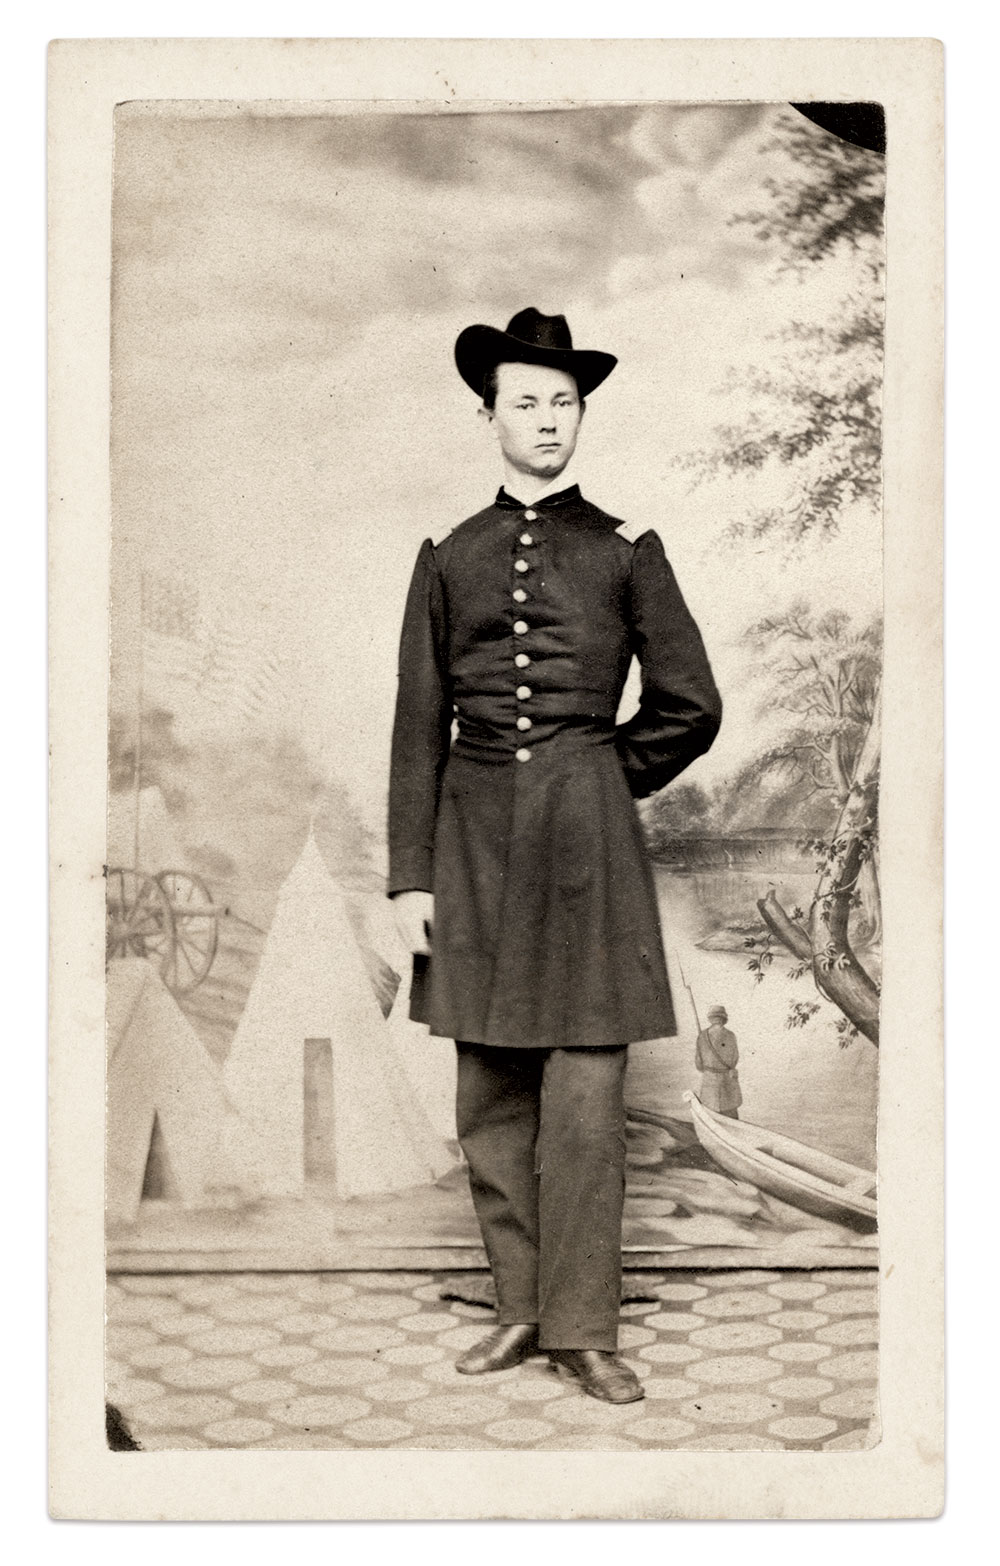 2nd Lt. William J. Fisher fell with a death wound in his chest. Carte de visite by John Holyland of Washington, D.C.